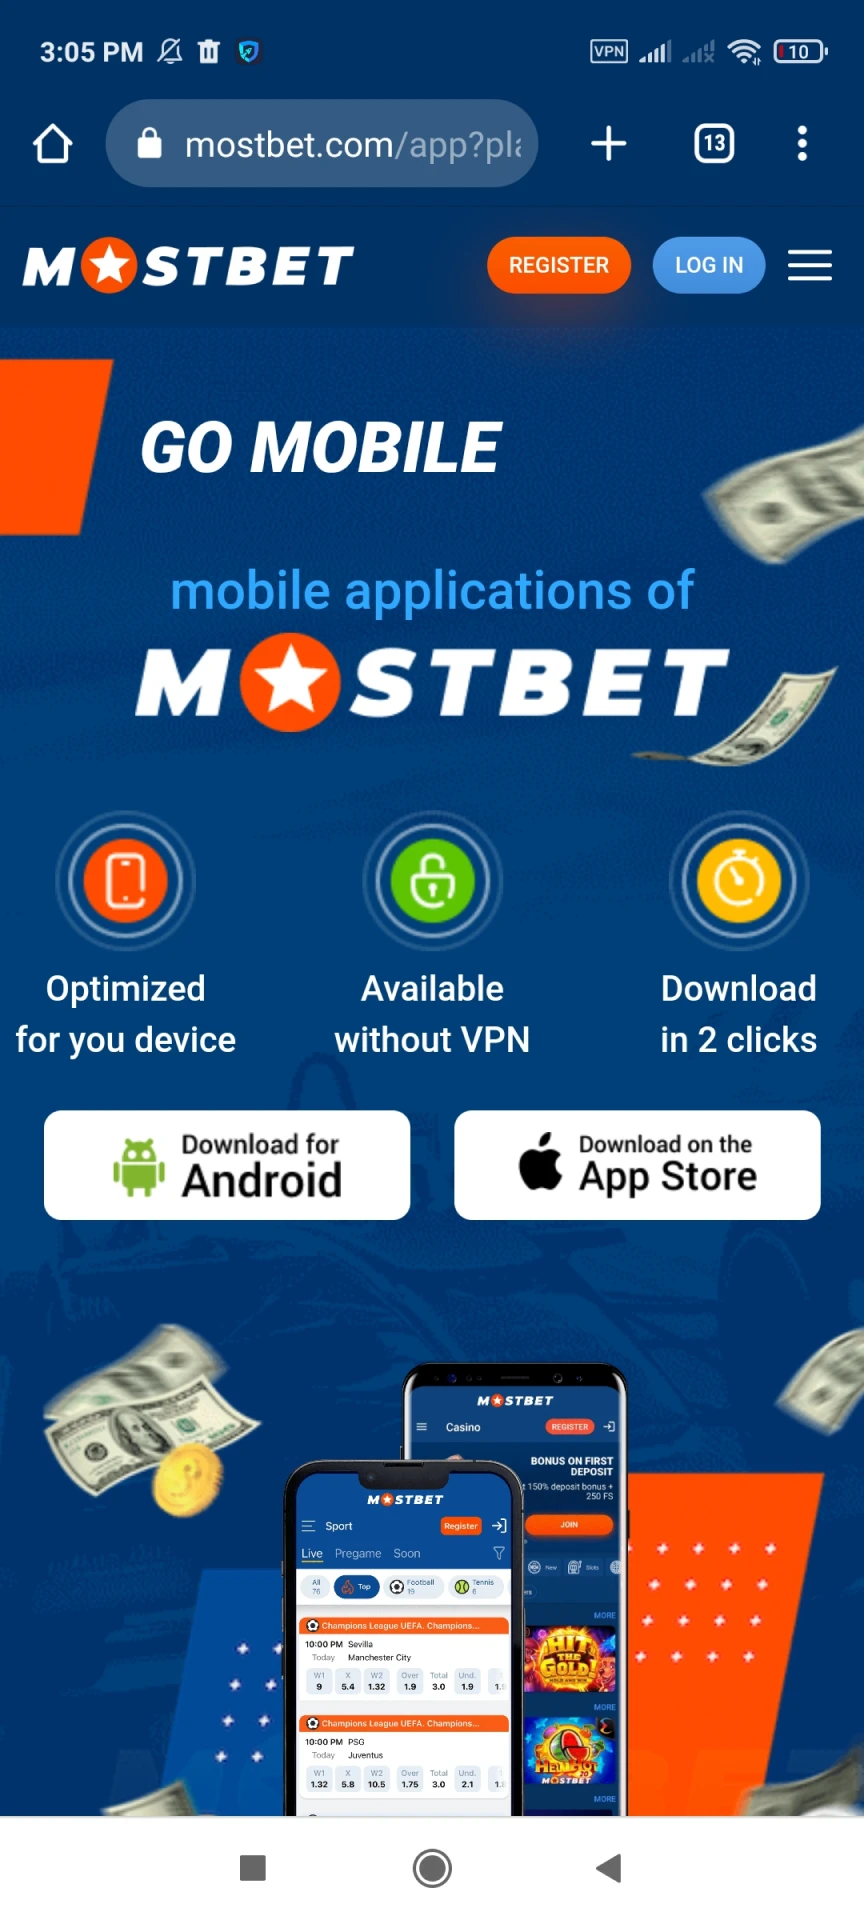 On the Mostbet website, find the section to download the application.